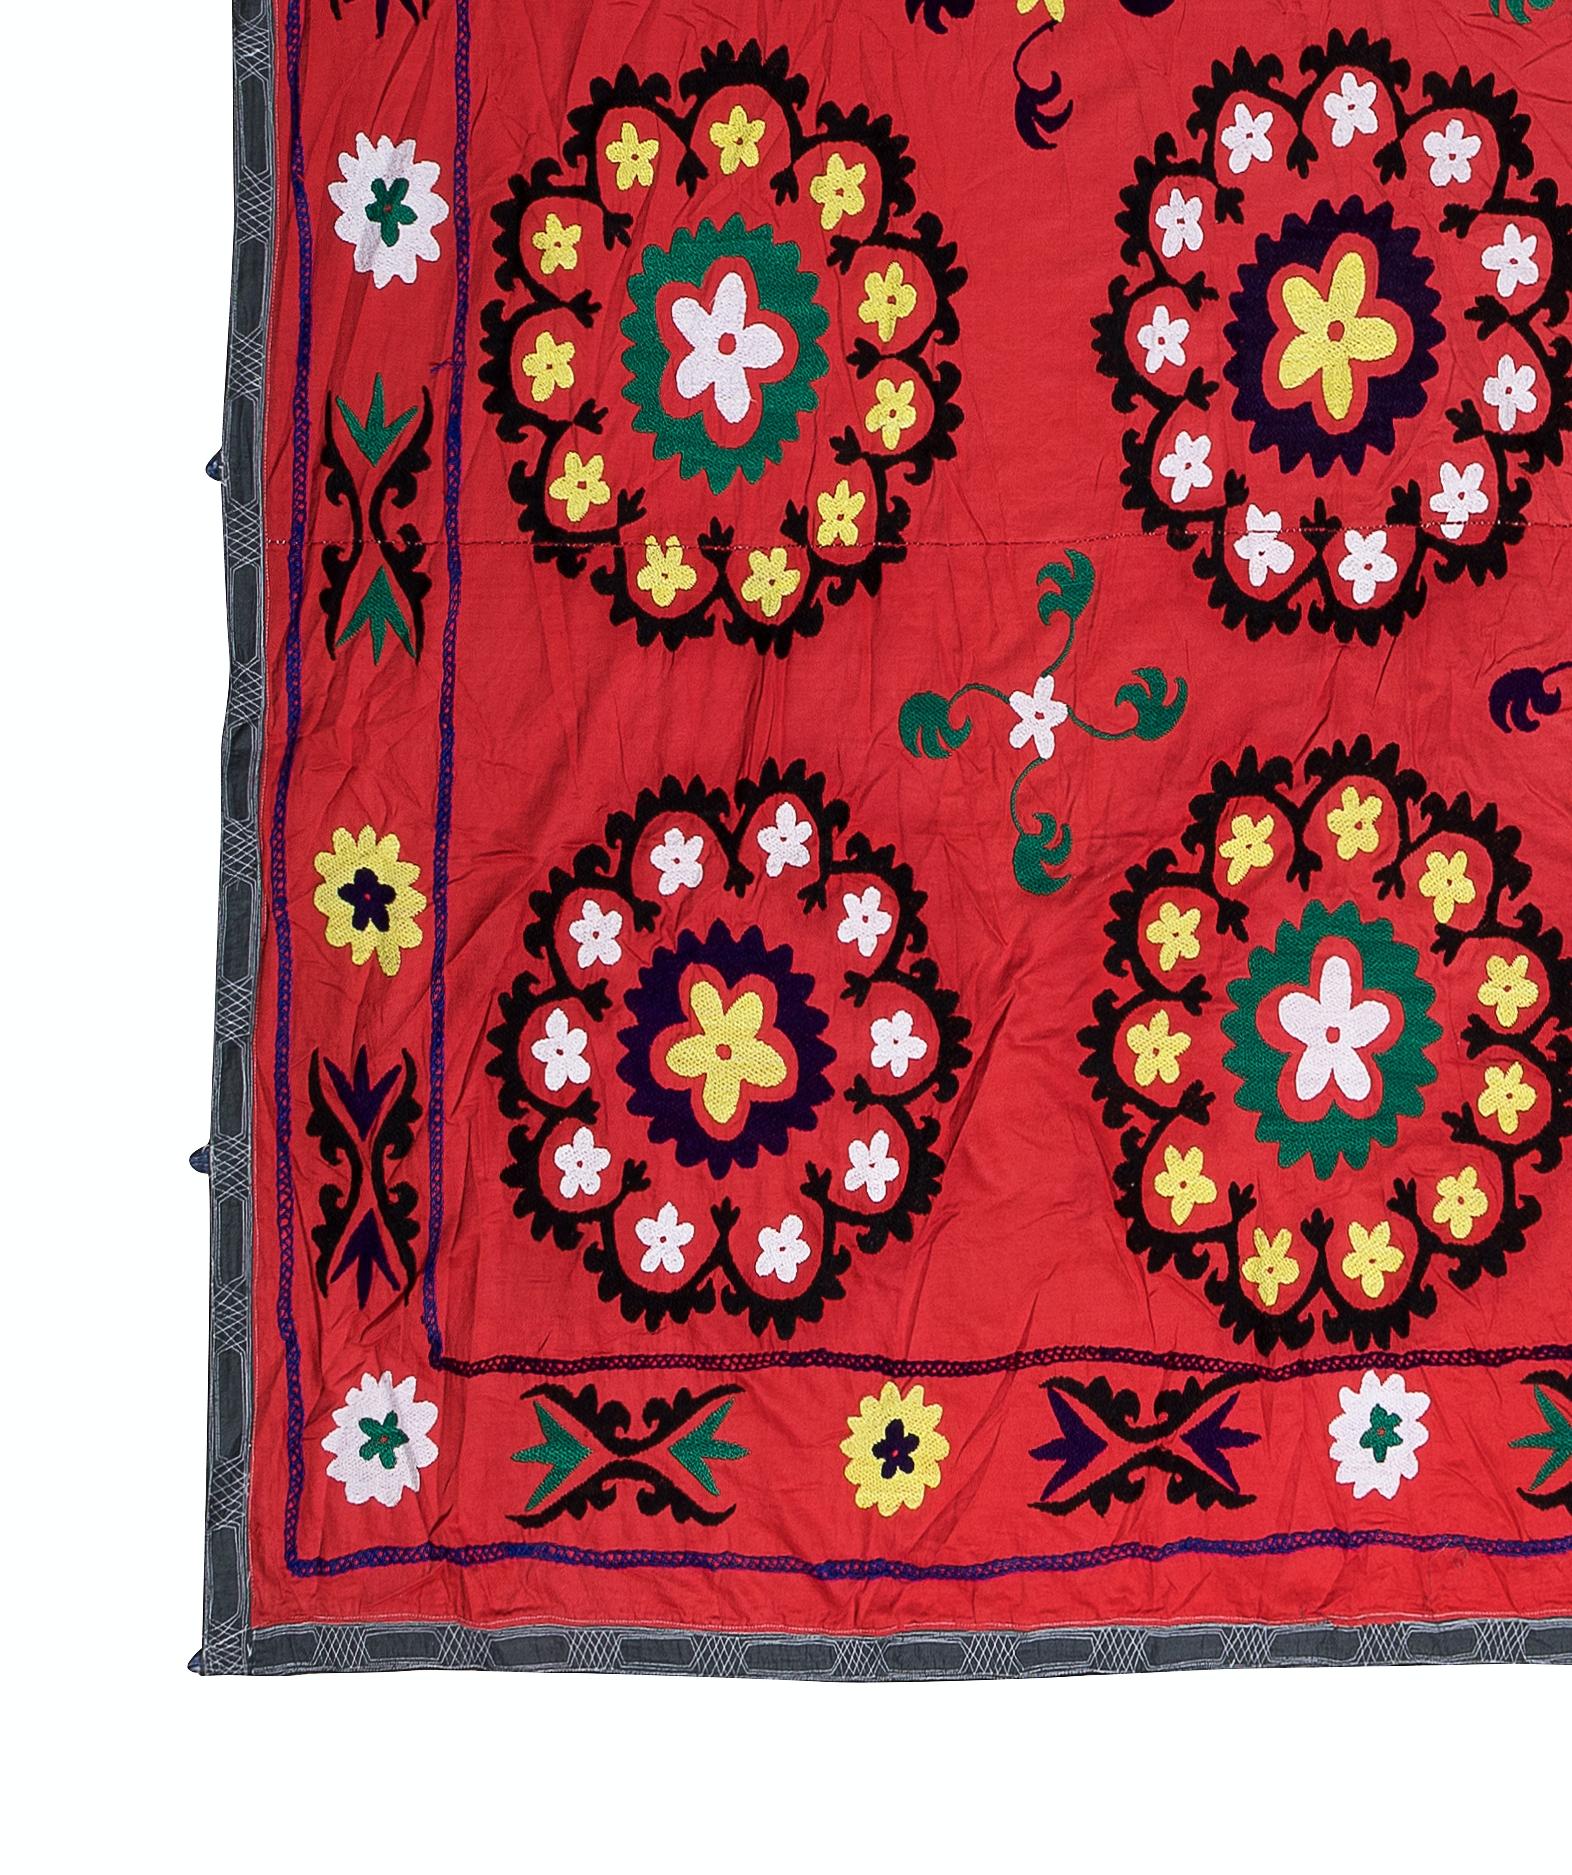 Embroidered 7.9x7.9 Ft Vintage Silk Embroidery Bed Cover, Uzbek Tablecloth, Red Wall Hanging For Sale